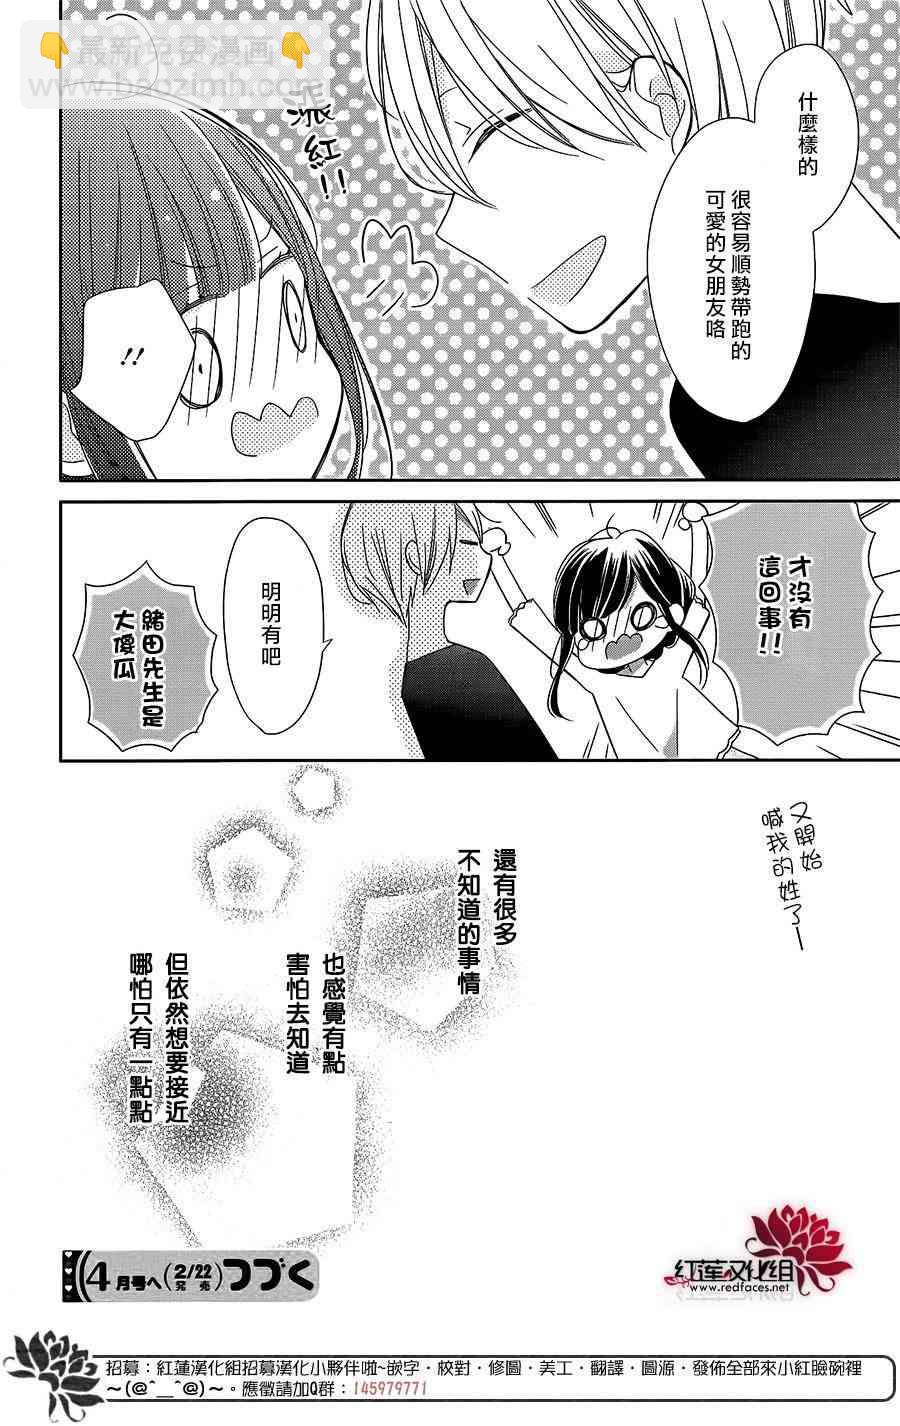 If given a second chance - 7话 - 6